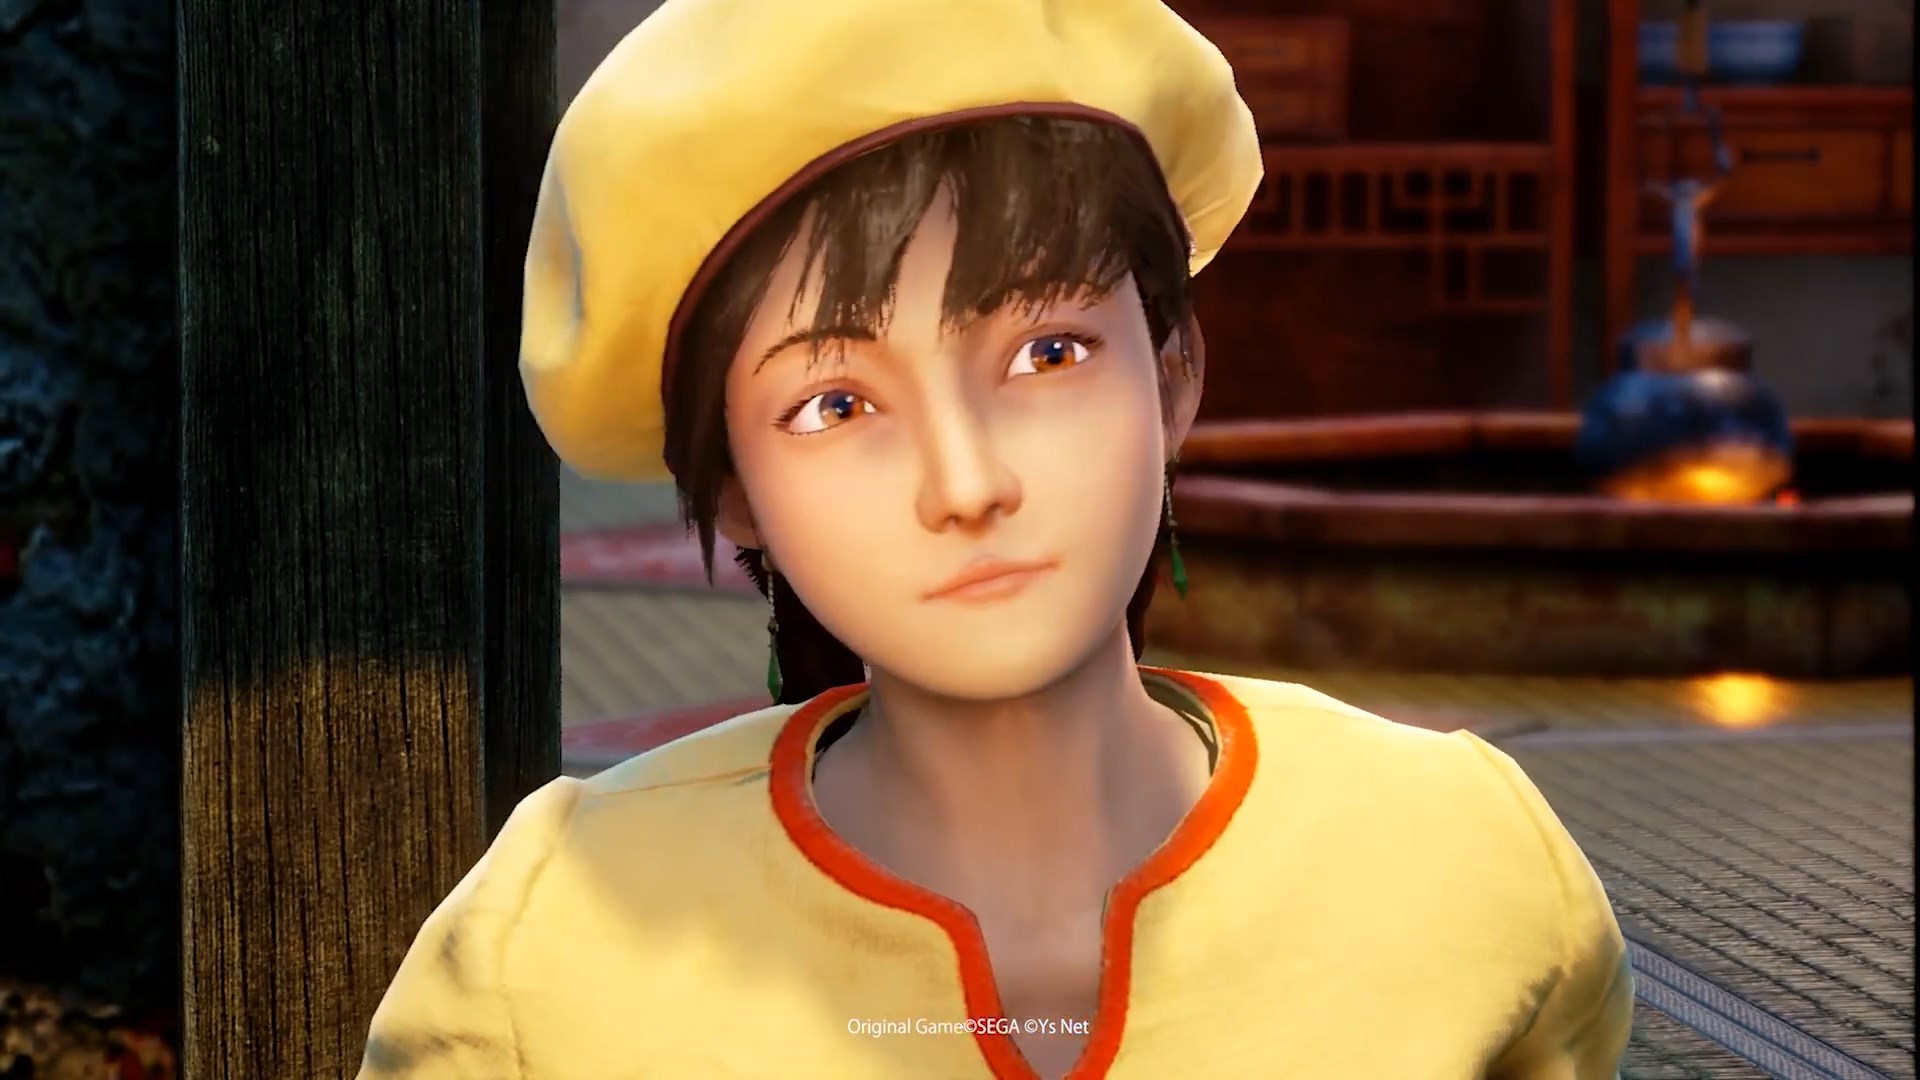 Shenmue III – The 1st Teaser